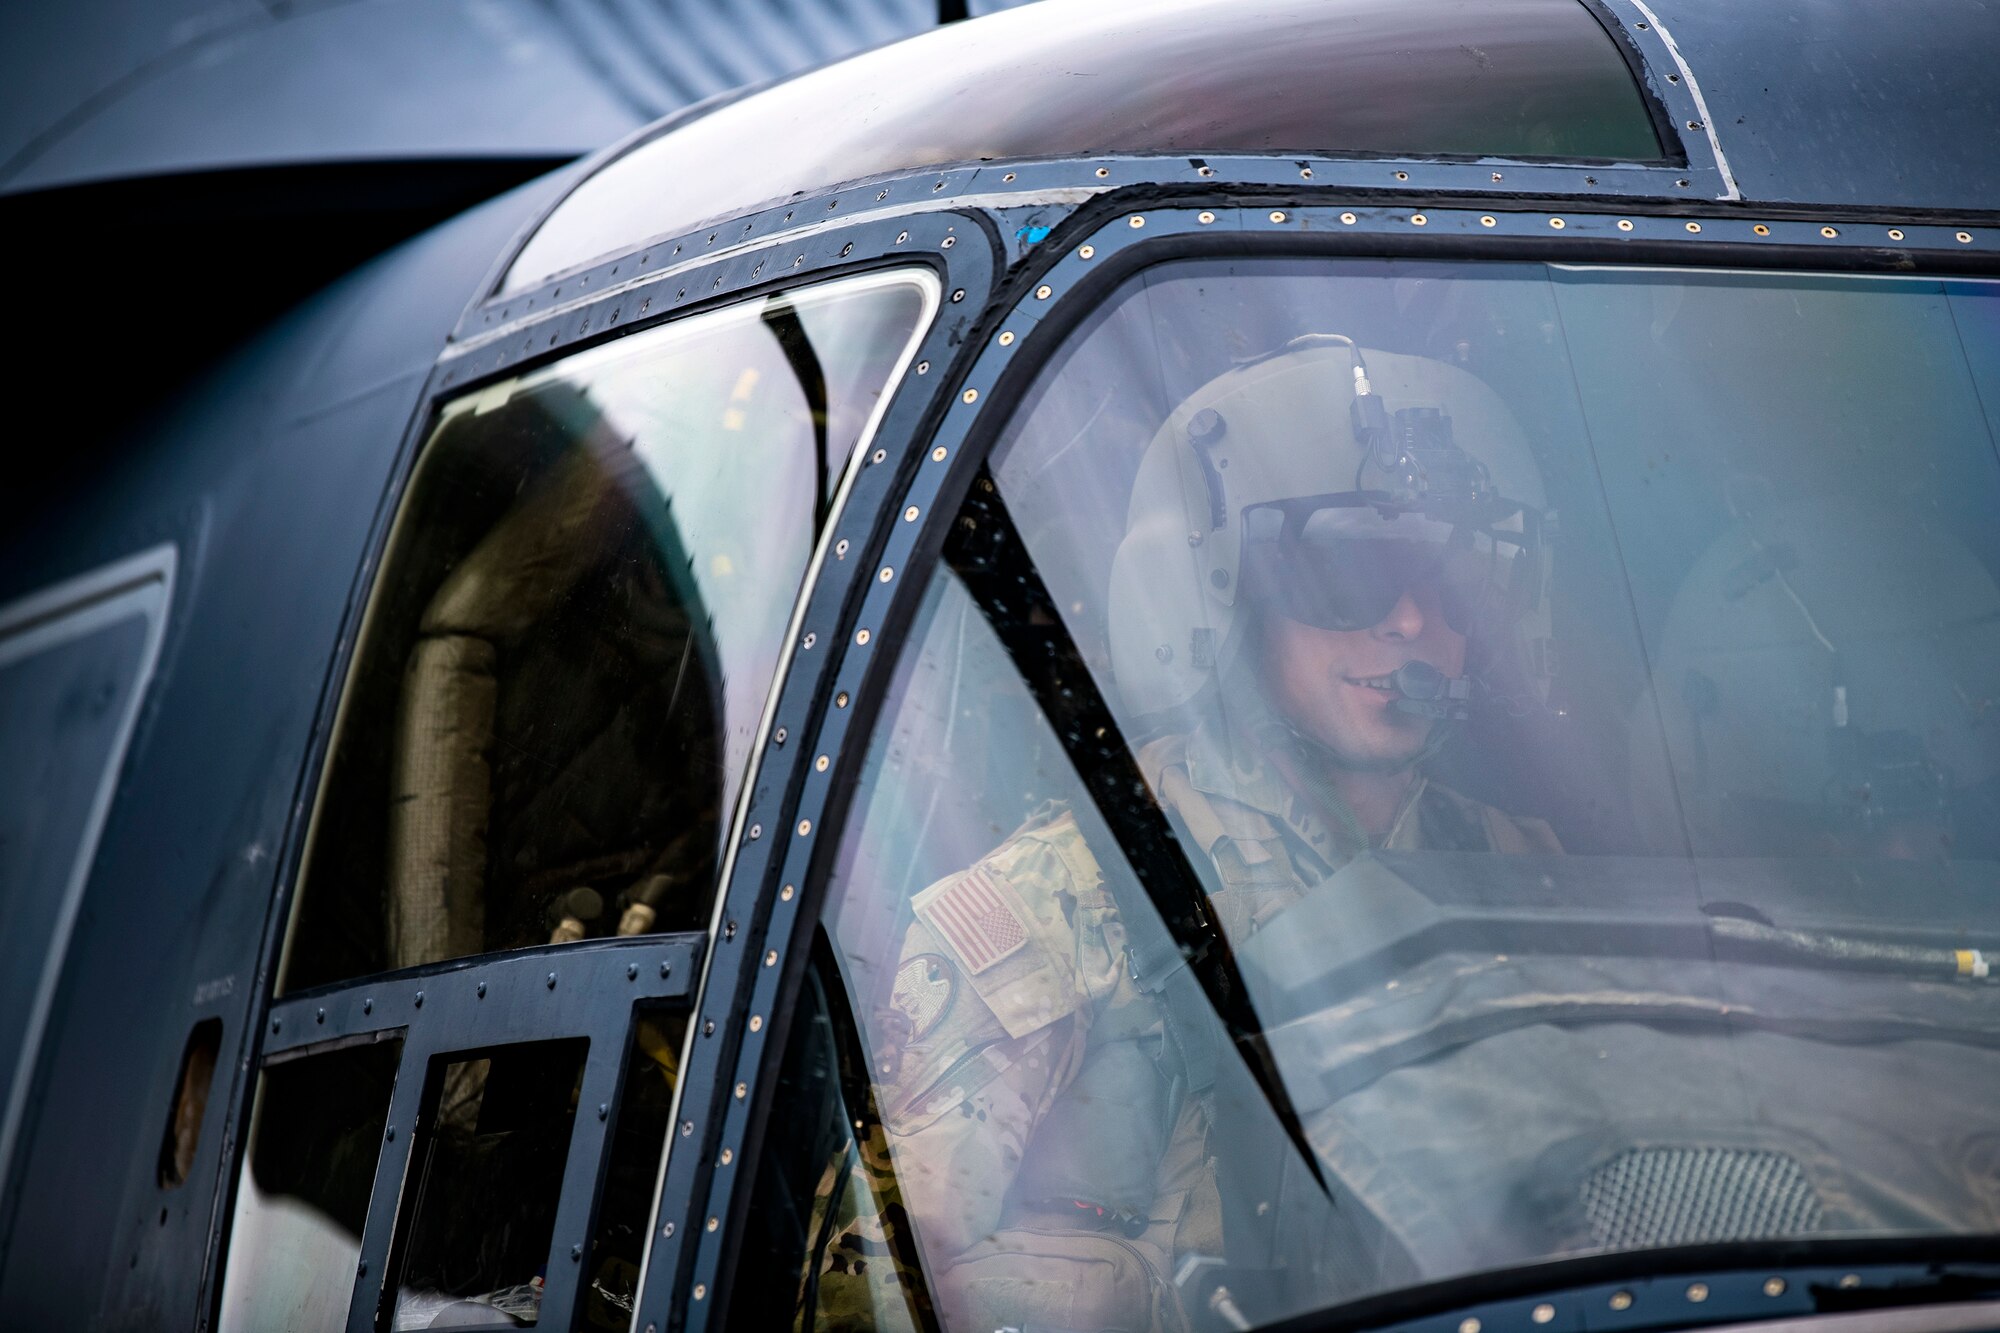 A CV-22A Osprey pilot conducts pre-flight procedures during an Agile Combat Employment exercise at RAF Fairford, England, Sept. 13, 2021. The exercise enables U.S. forces in Europe to operate from locations with varying levels of capacity and support. This further ensures Airmen and aircrews are postured to deliver lethal combat power across the full spectrum of military operations. (U.S. Air Force photo by Senior Airman Eugene Oliver)